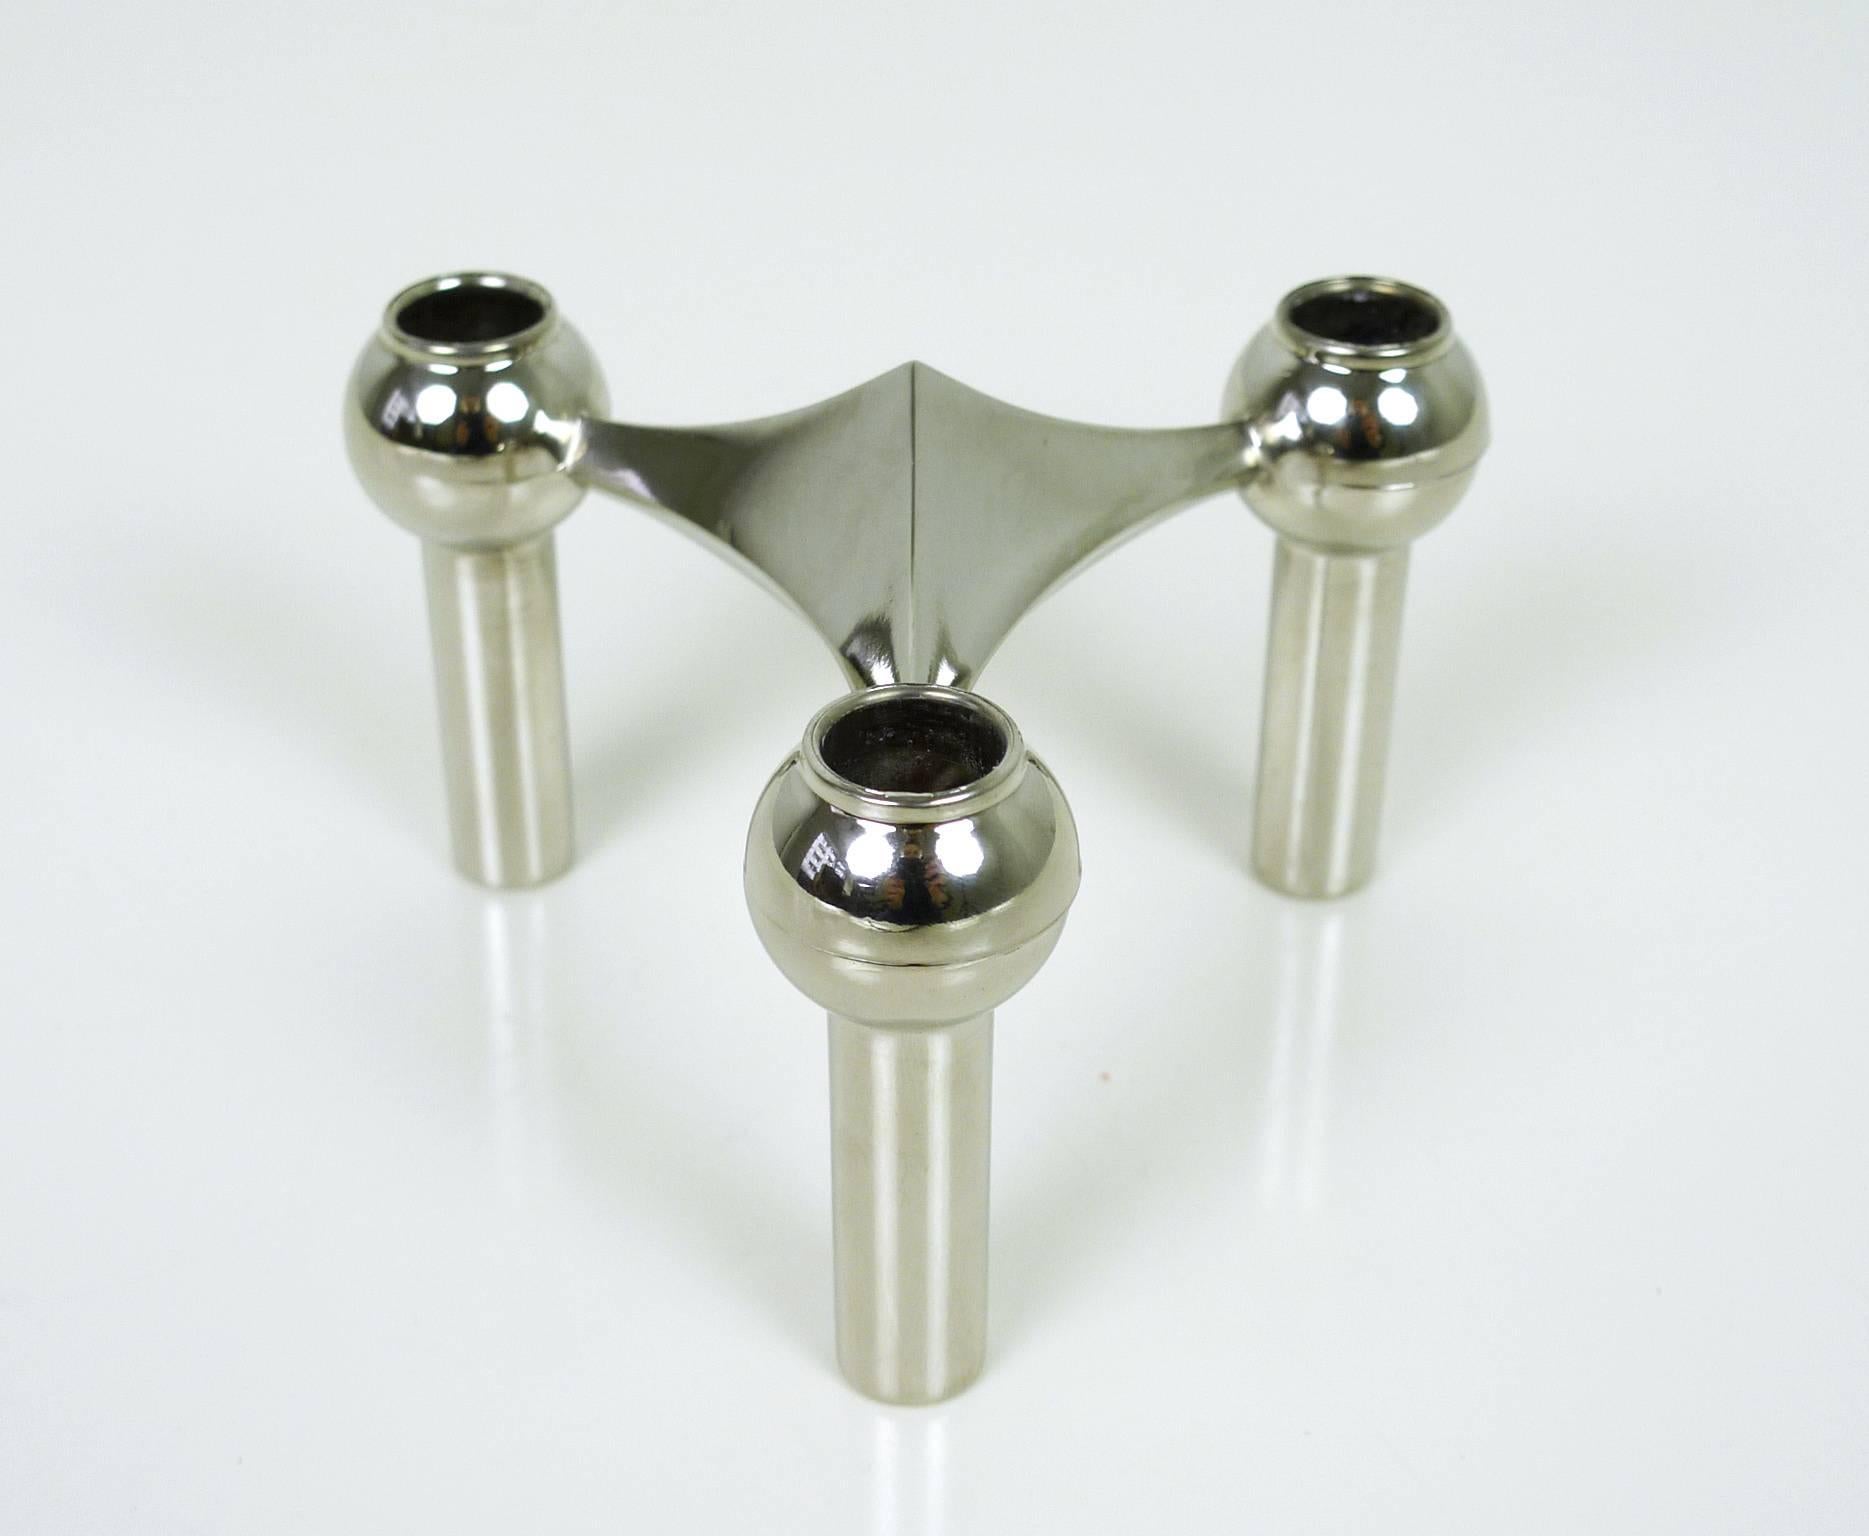 S22 Candlestick Holders with Table Candles from Fritz Nagel, Germany, 1960s For Sale 1